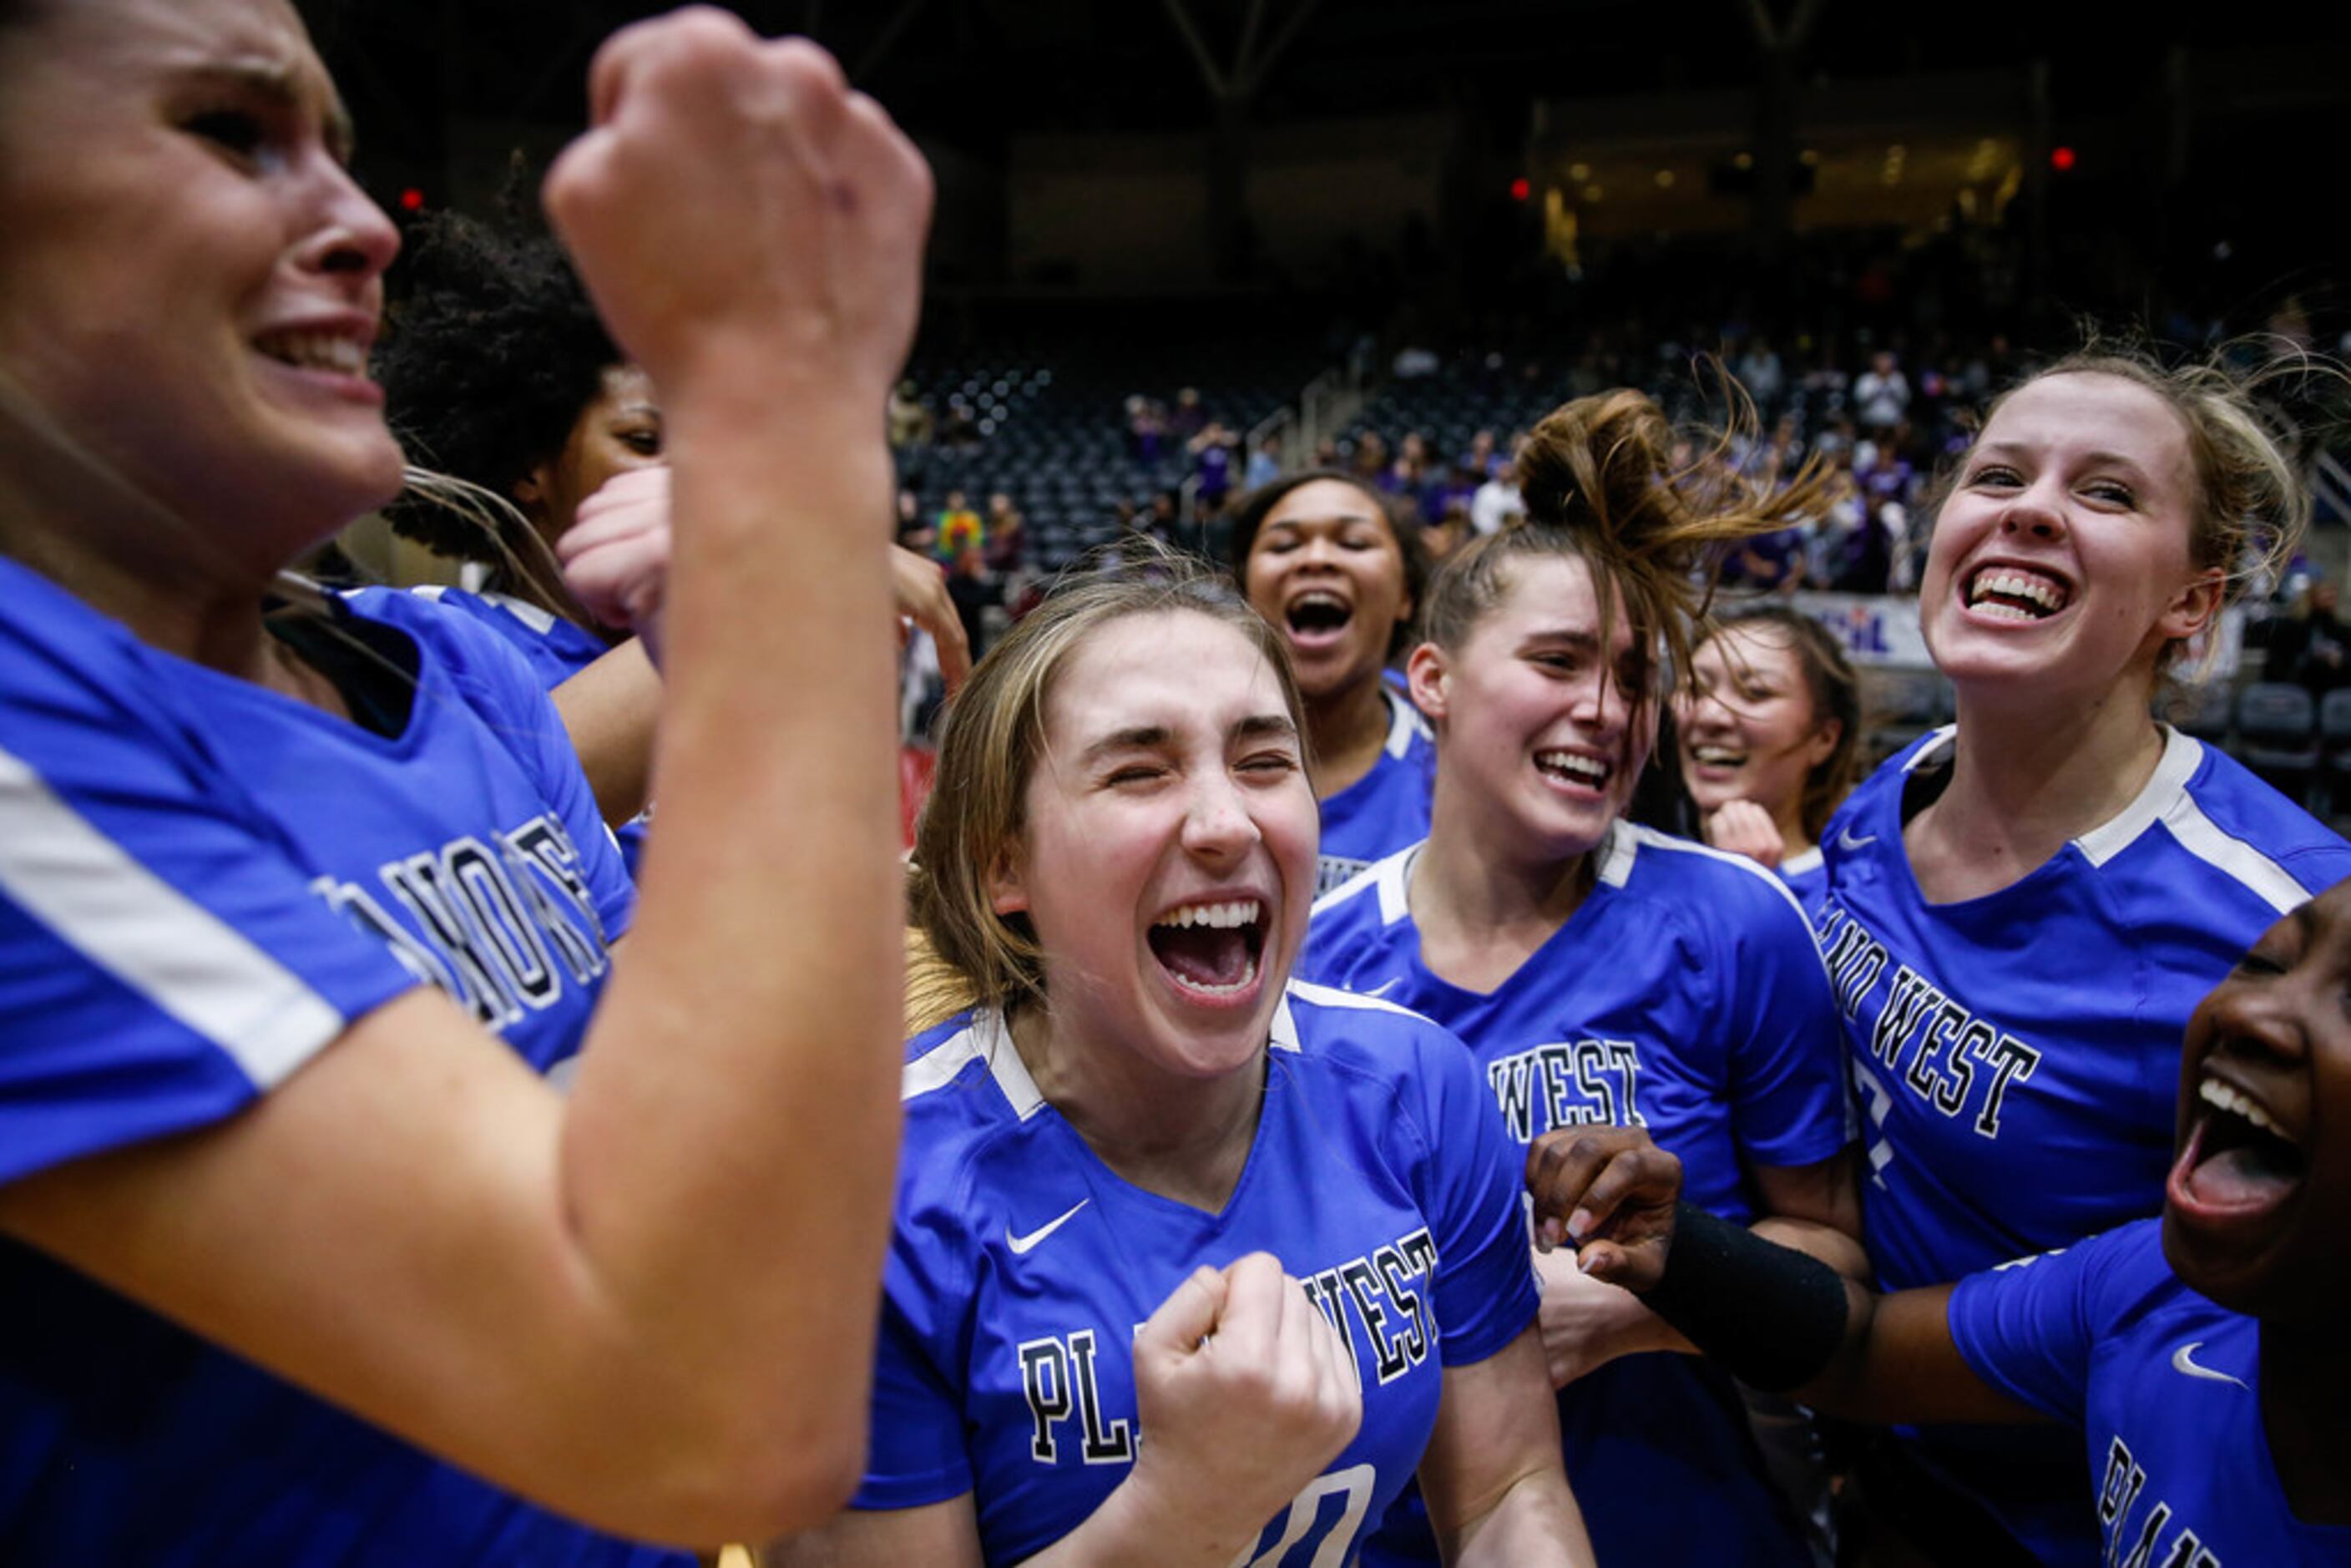 The Plano West Wolves celebrate after winning the fifth and final set during a class 6A...